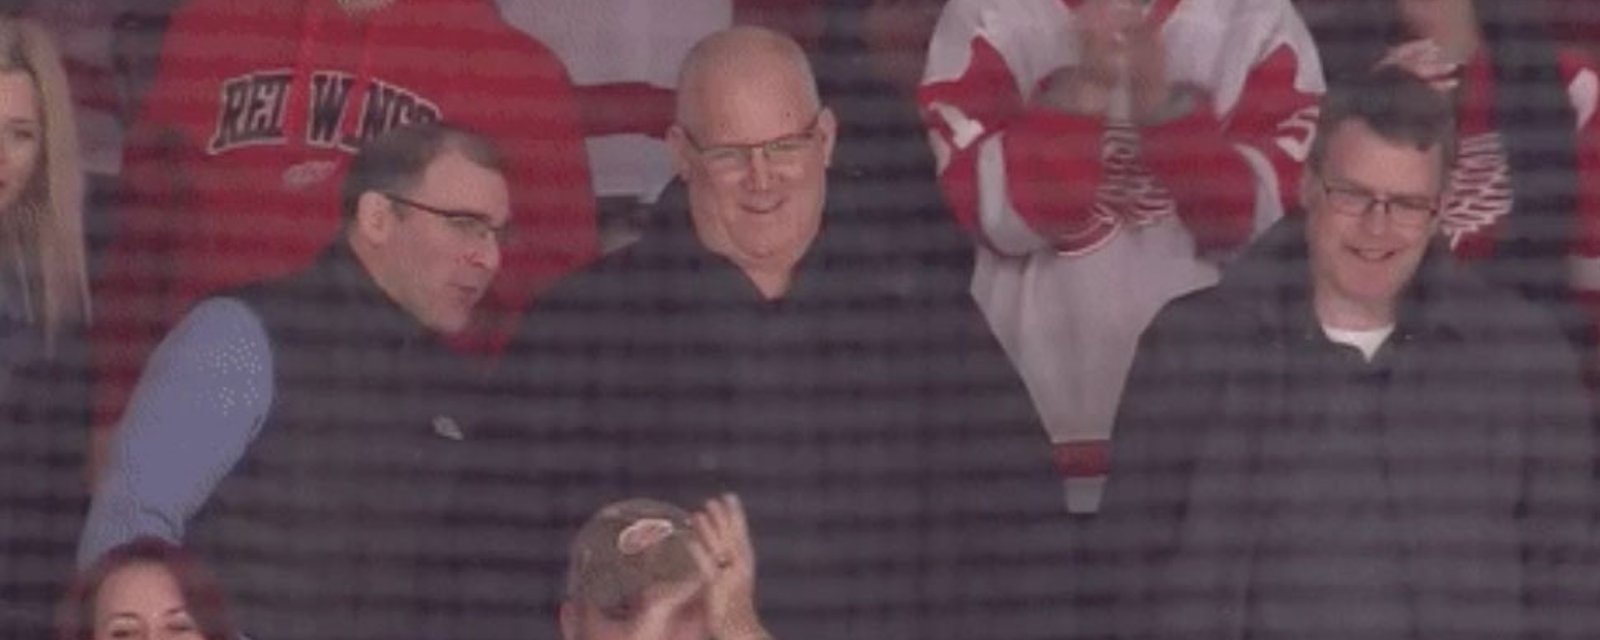 Breaking: Brady Tkachuk drops the mitts and his Dad is absolutely LOVING it!